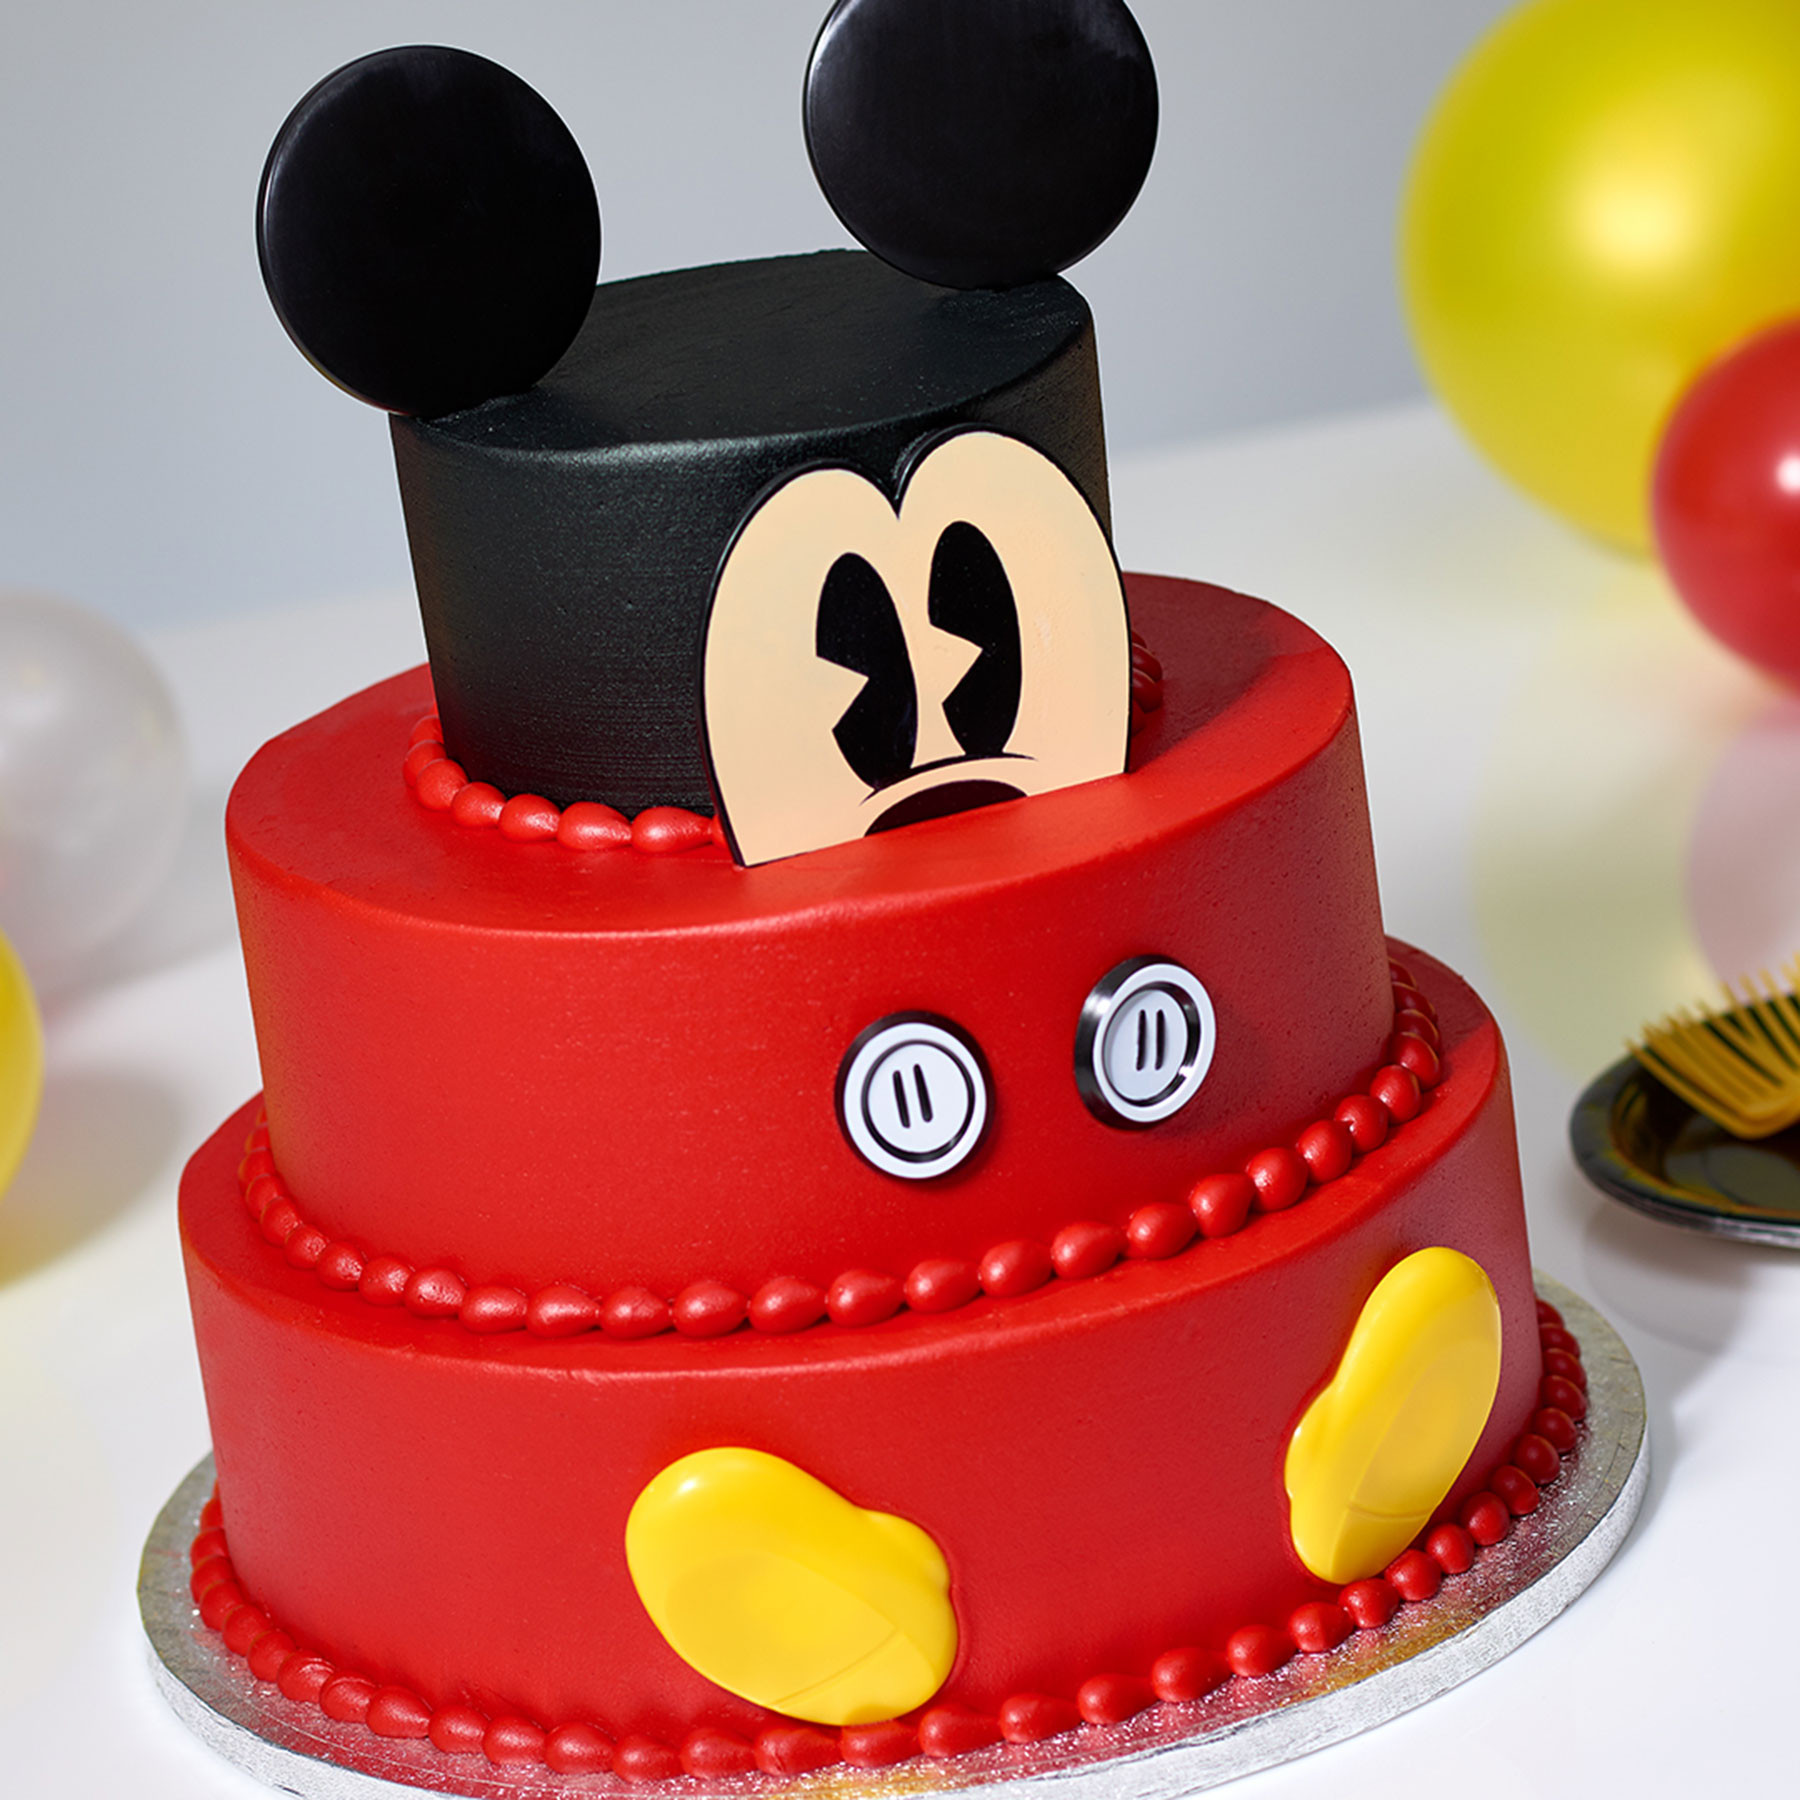 Birthday Cakes At Sams Club
 Sam s Club Is Selling 3 Tier Mickey Mouse Cakes for the